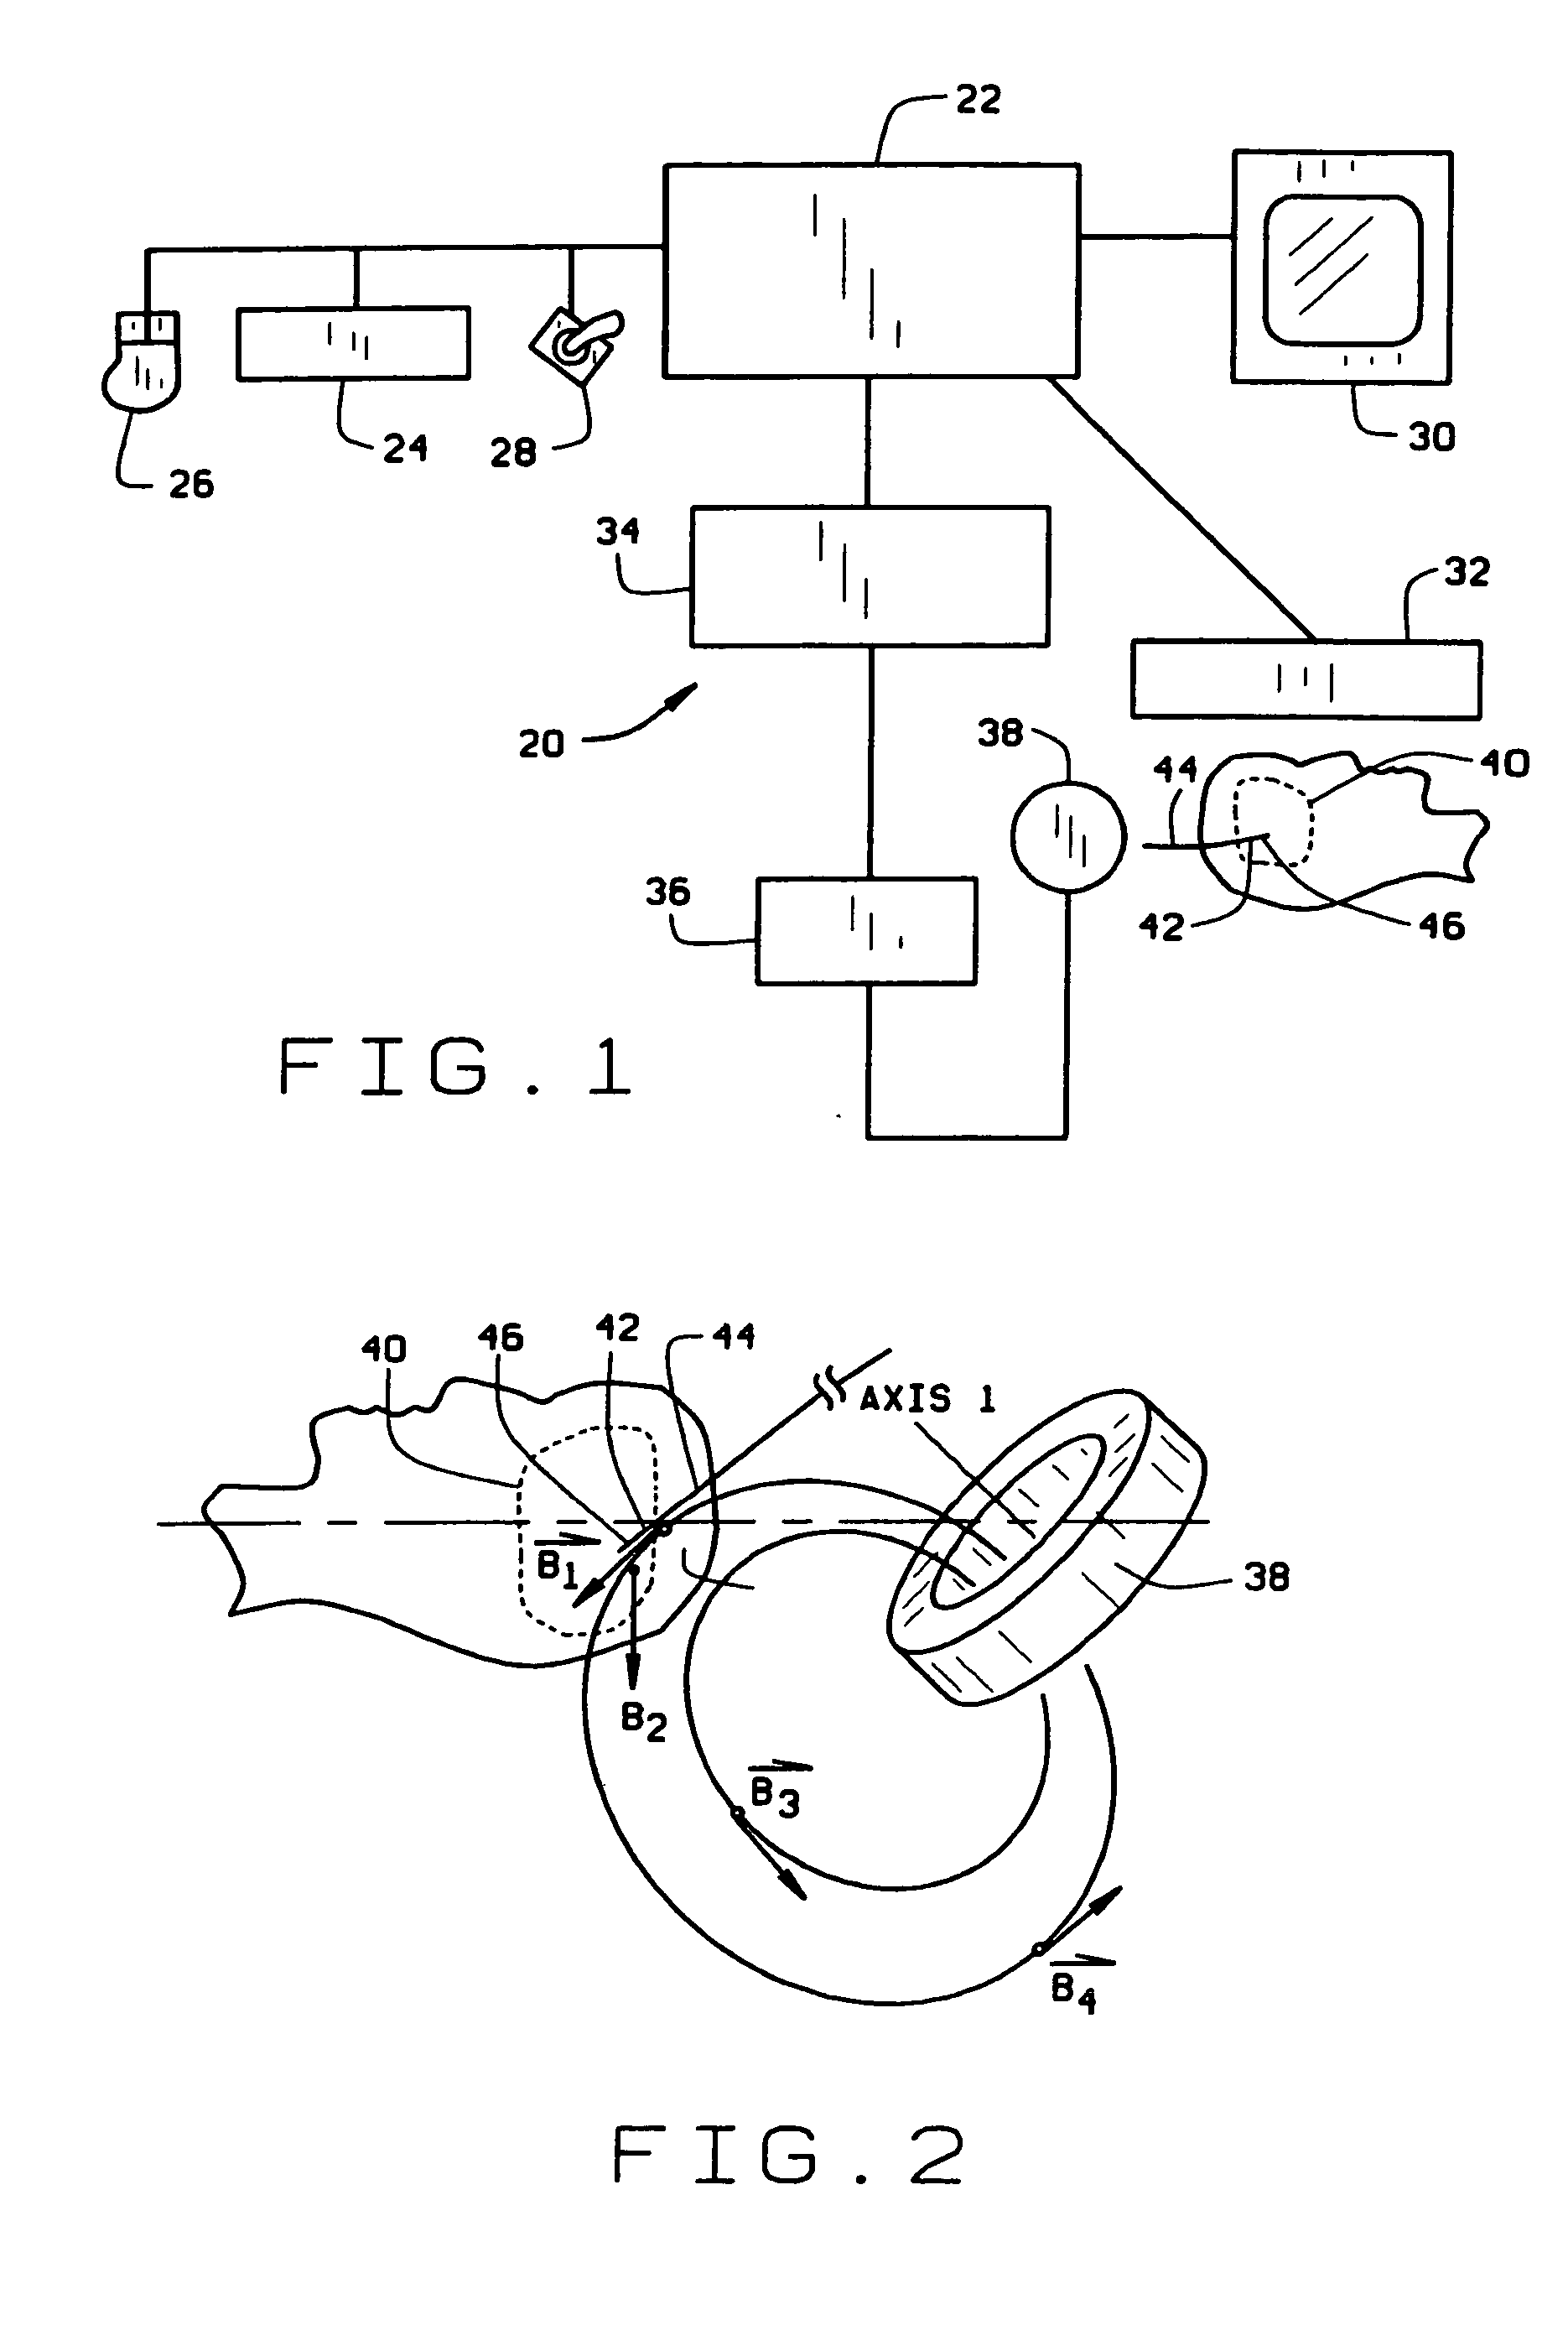 Method for safely and efficiently navigating magnetic devices in the body